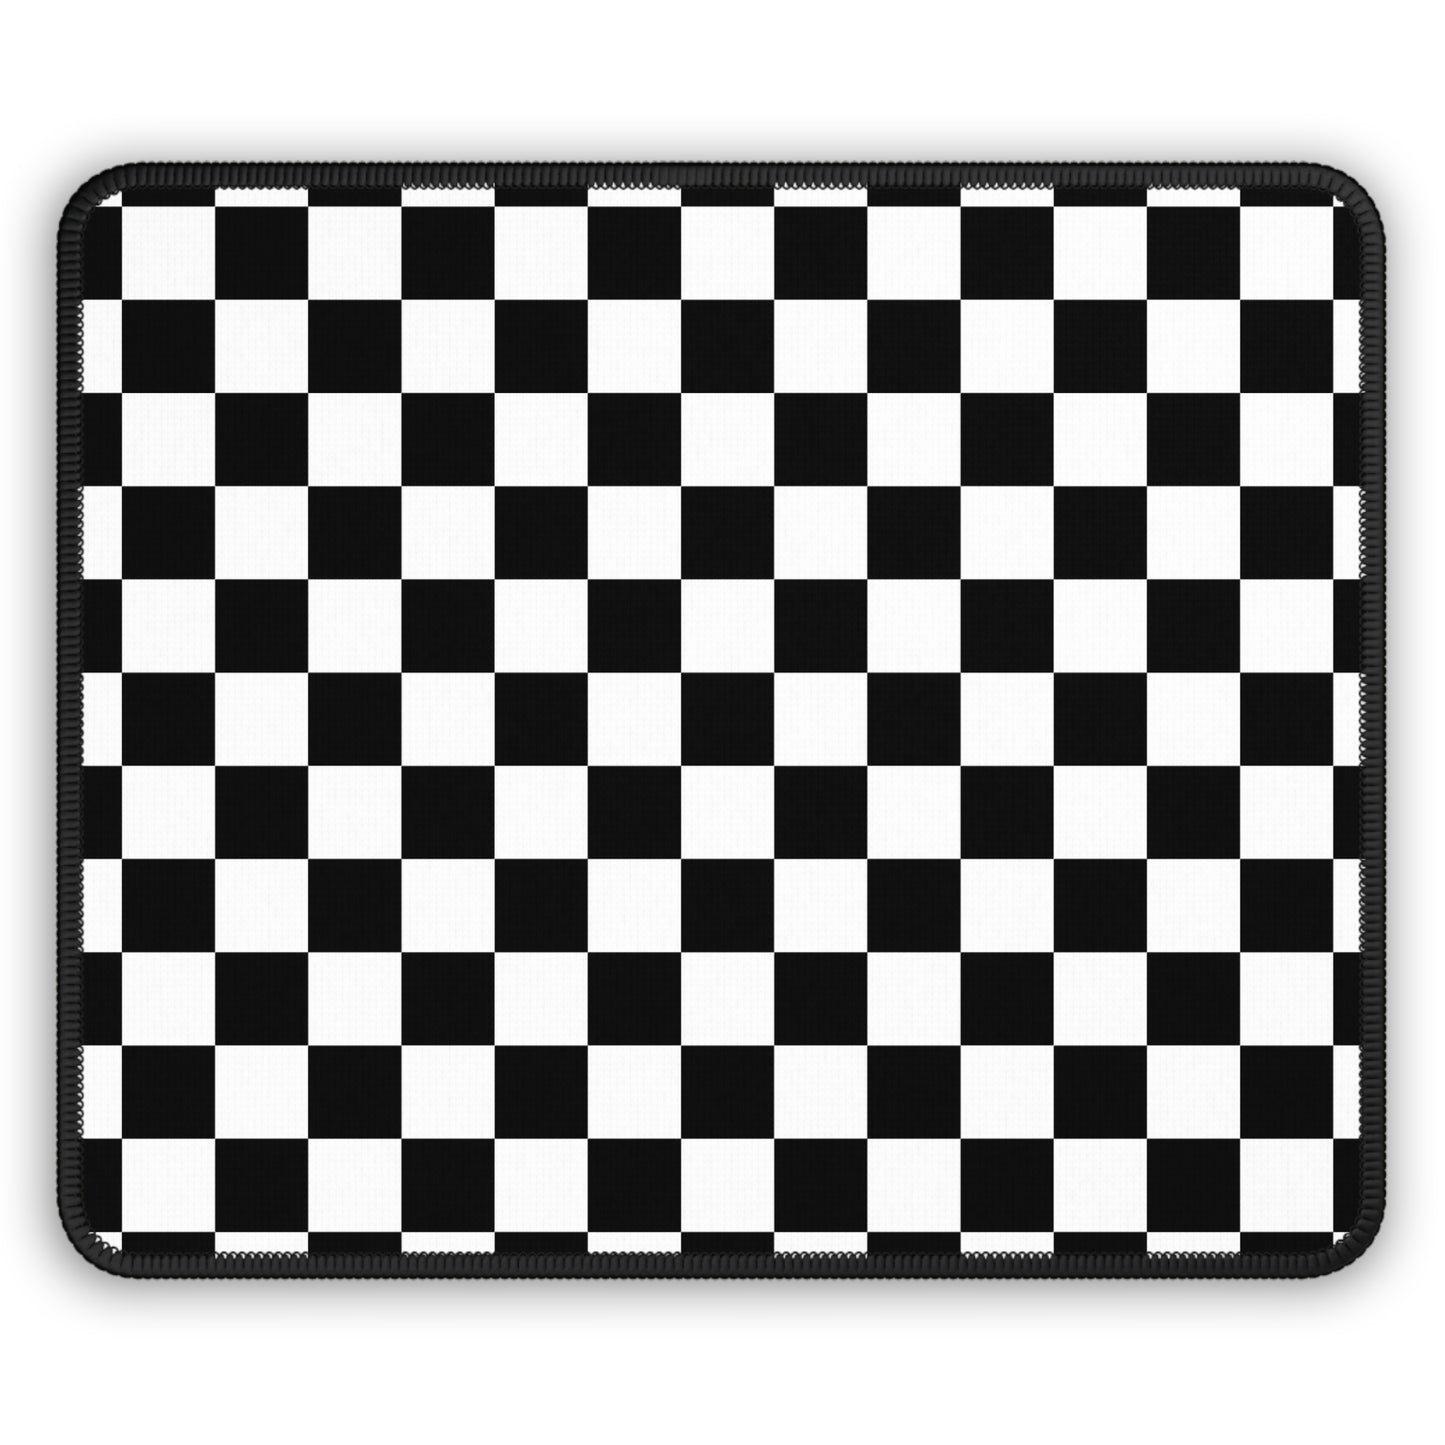 Black & White Checkered Gaming Mouse Pad - Desk Cookies